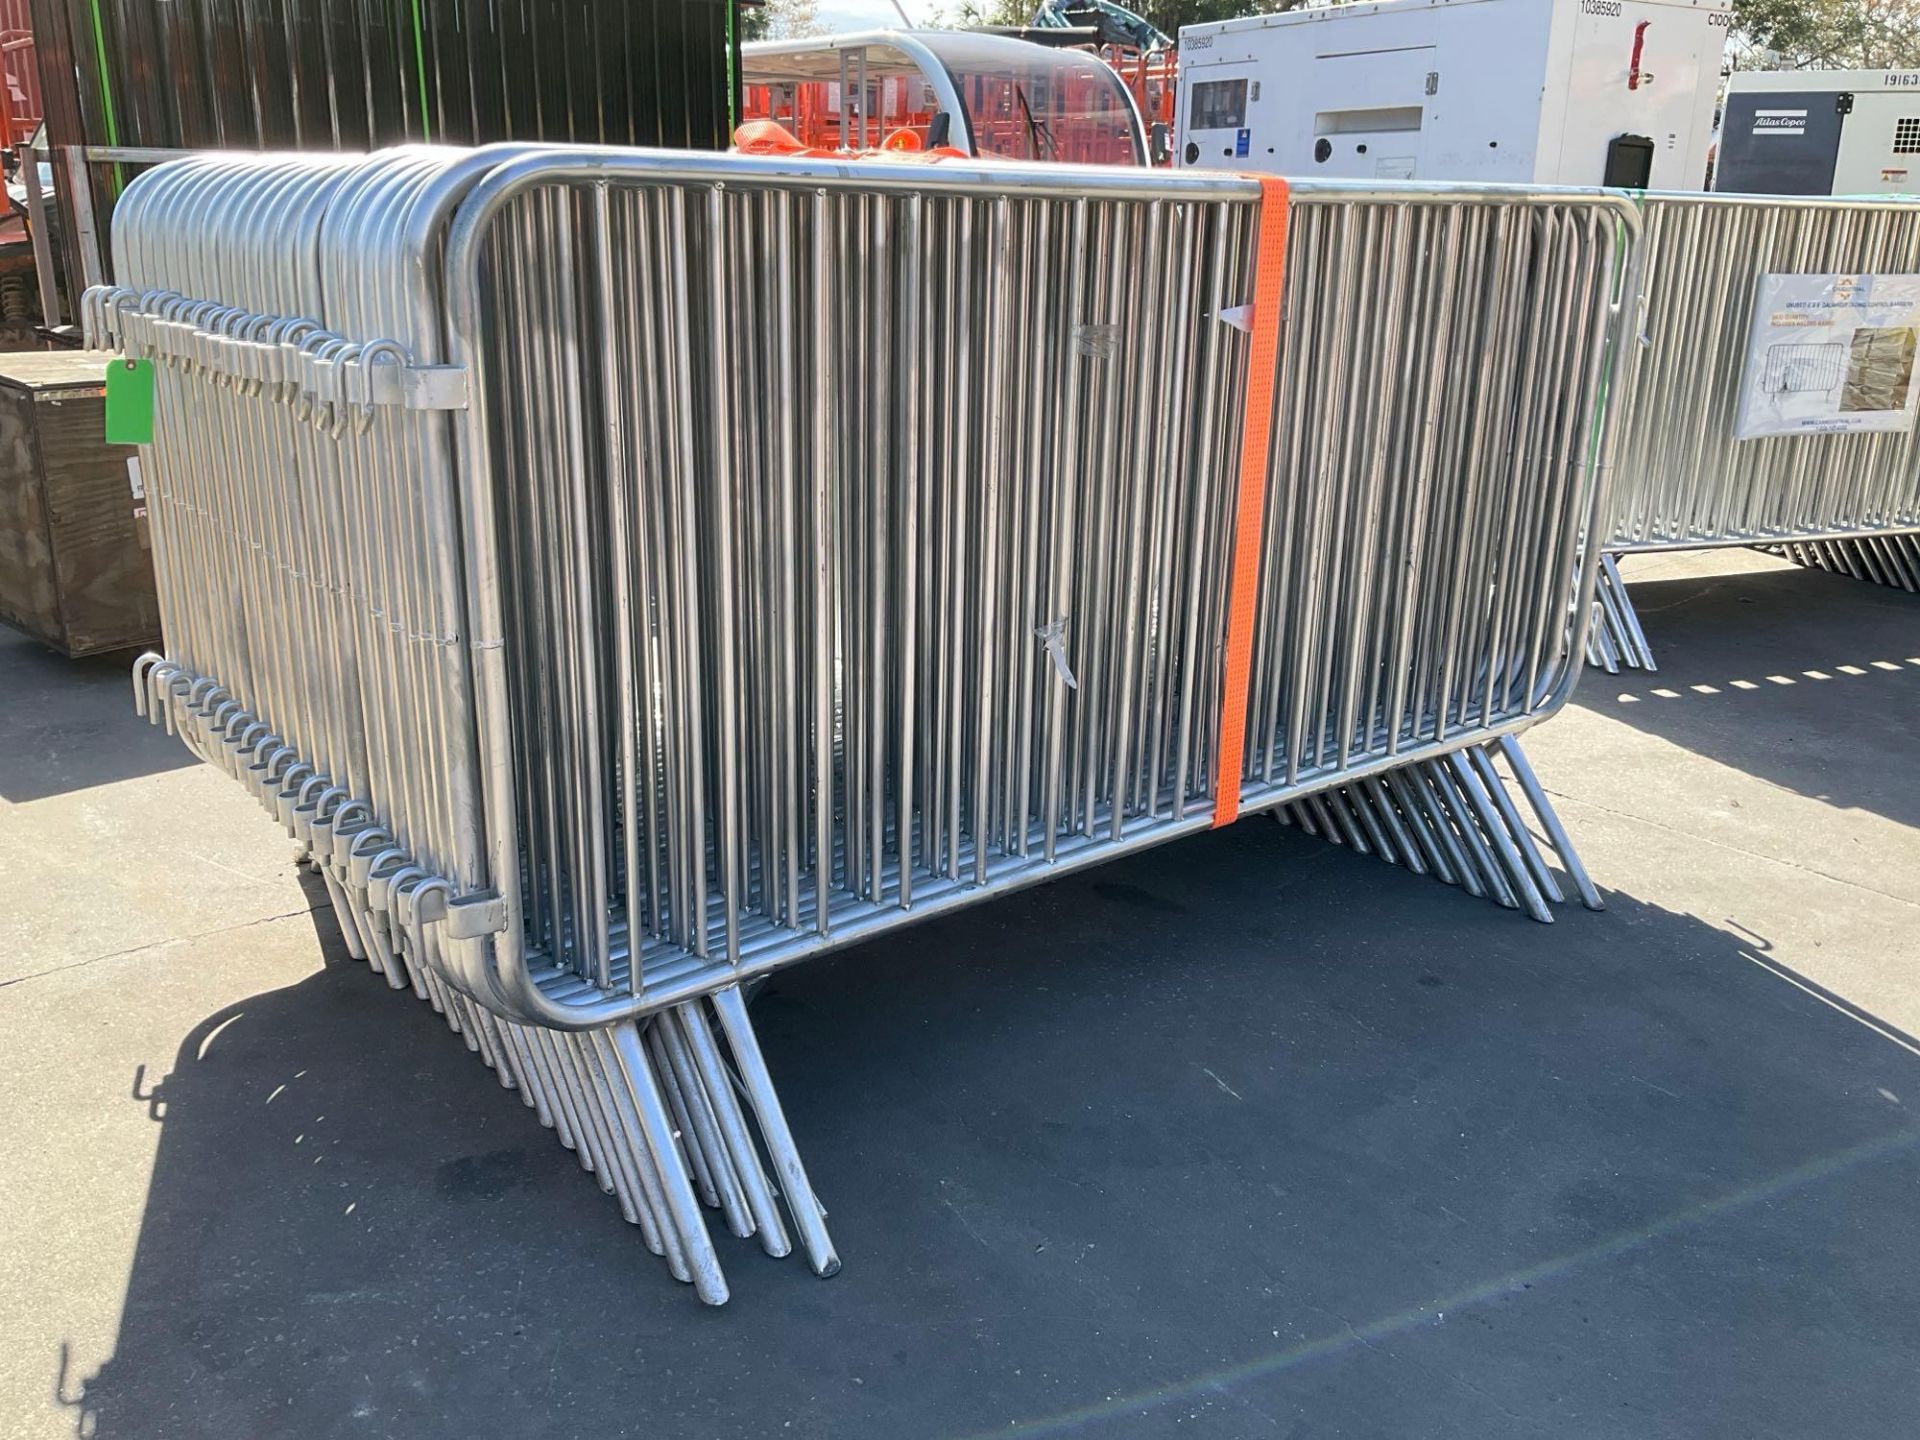 UNUSED 36PCS GALVANIZED CONSTRUCTION SITE / CROWD CONTROL FENCE/BARRICADES, APPROX 4FT x 8FT - Image 6 of 6